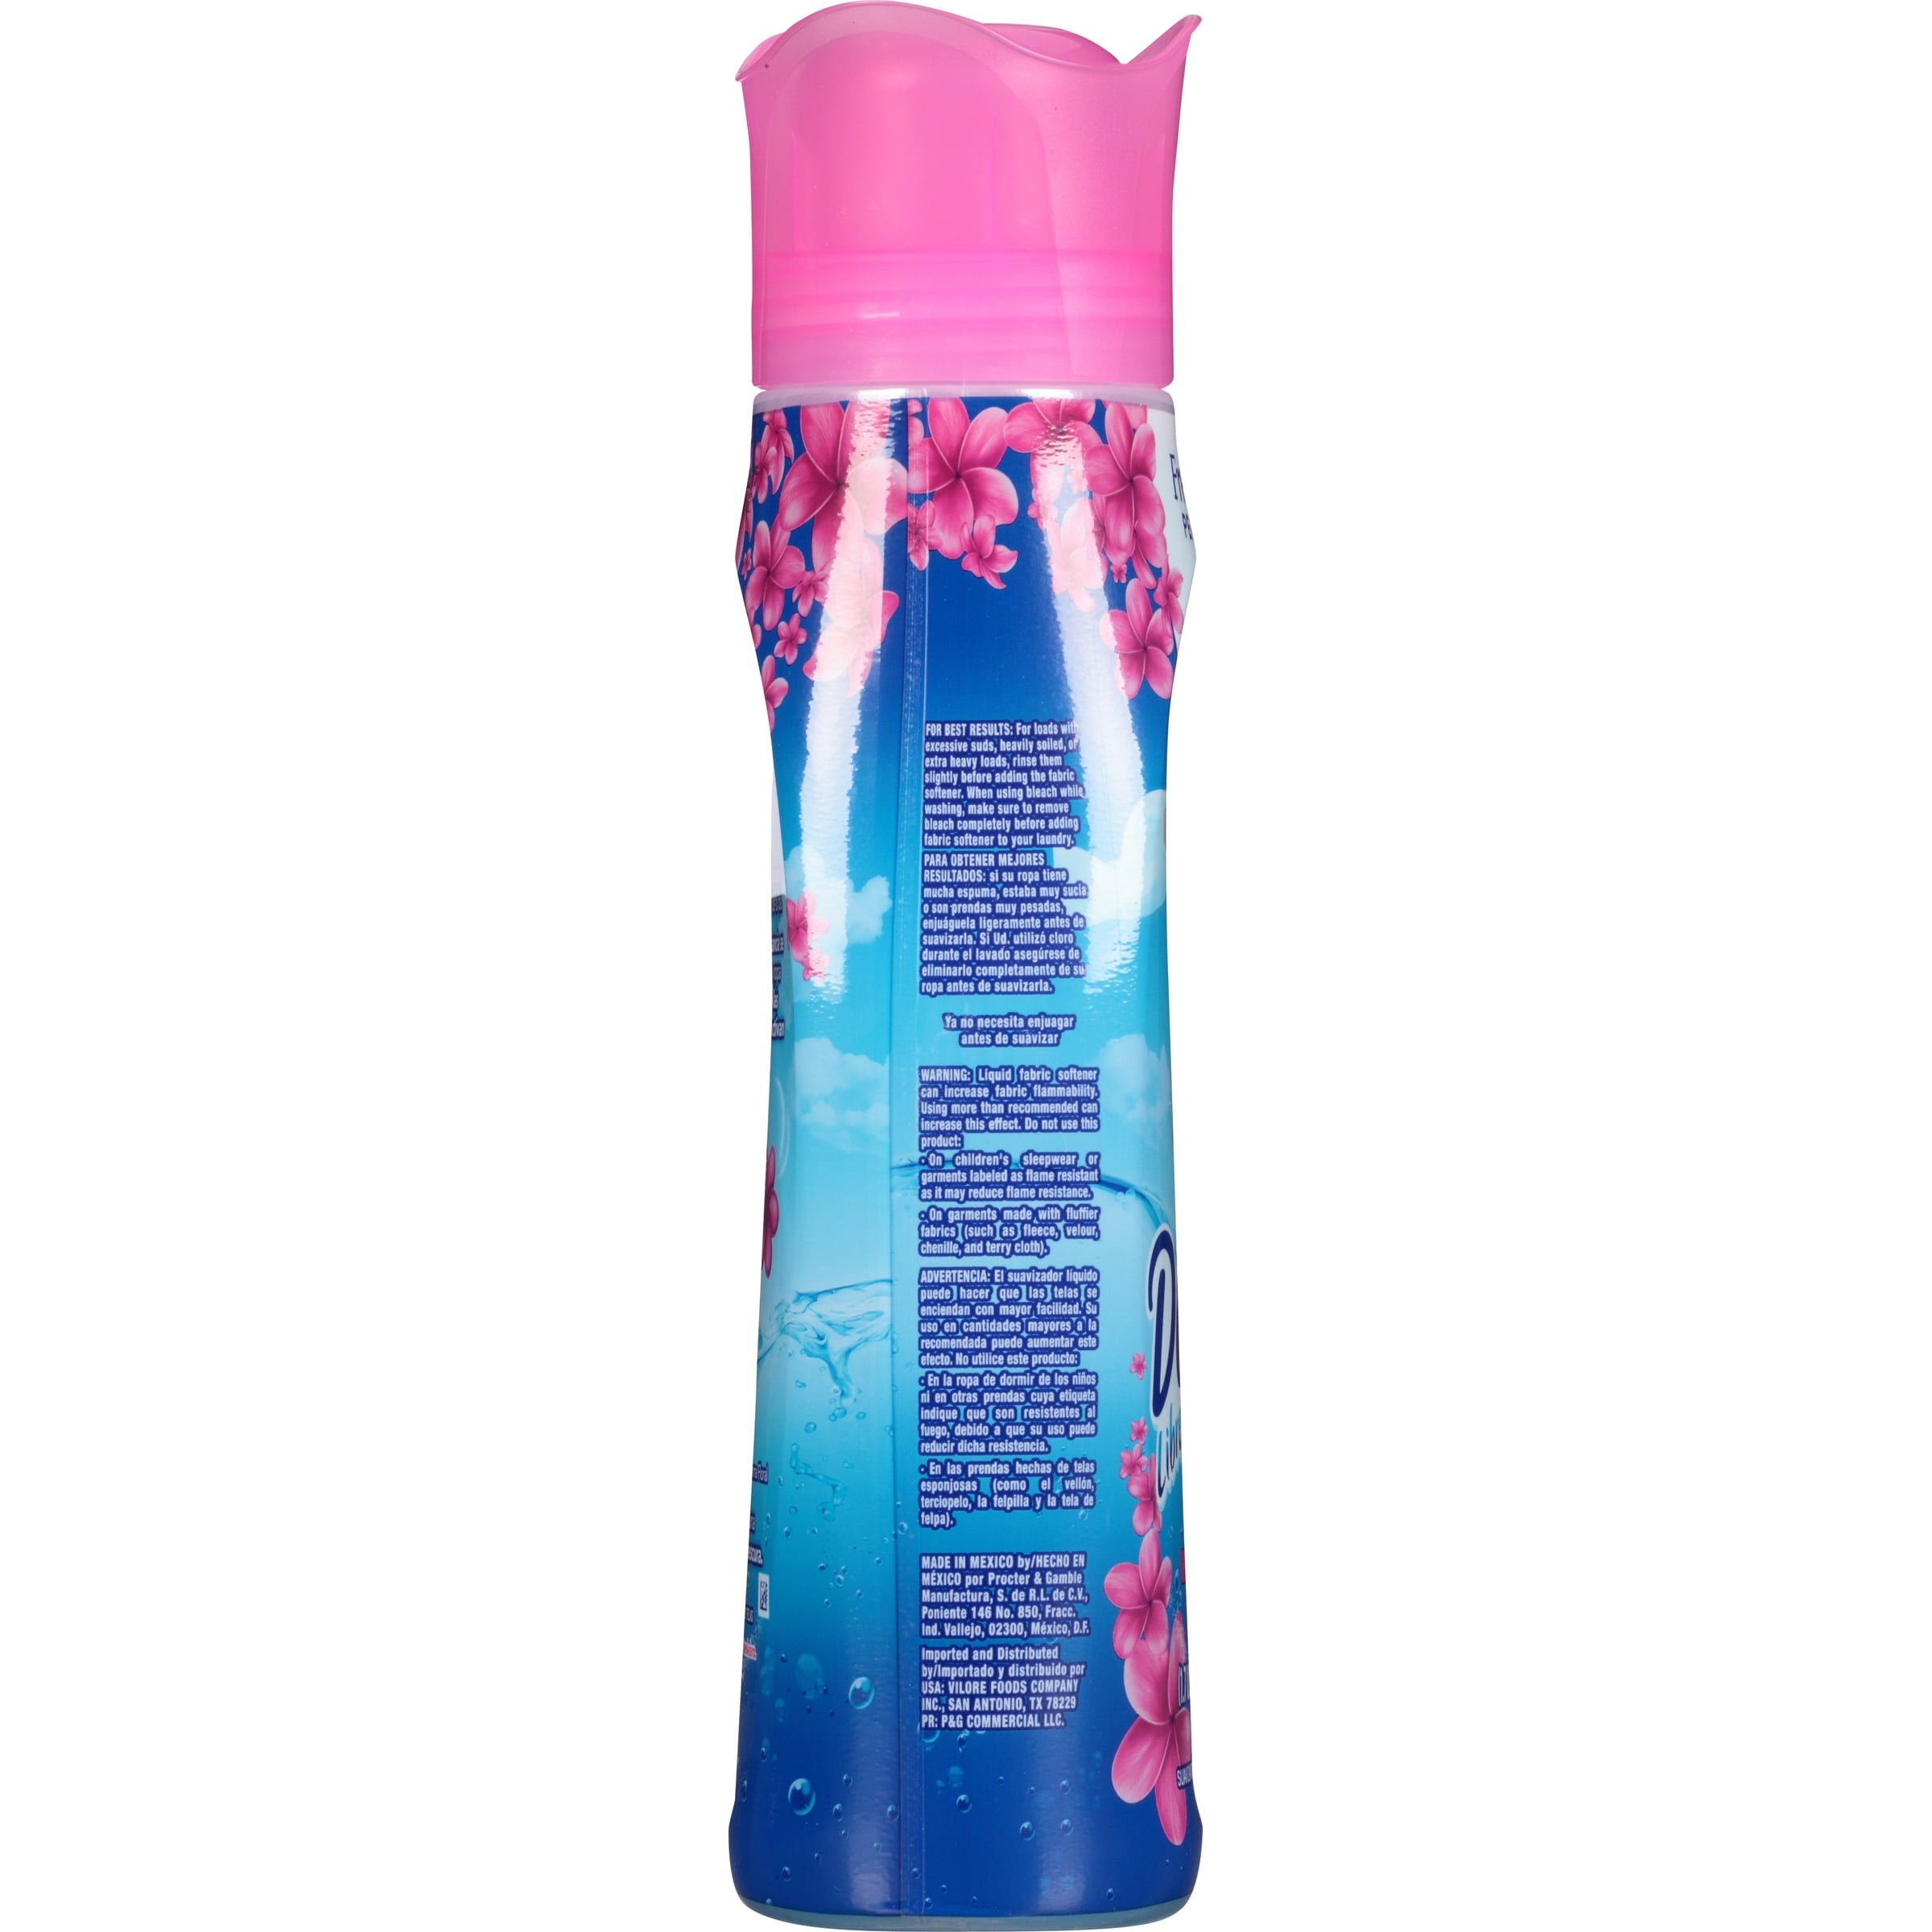 Downy Aroma Floral, 800ml 9-Pack – Norton Supply